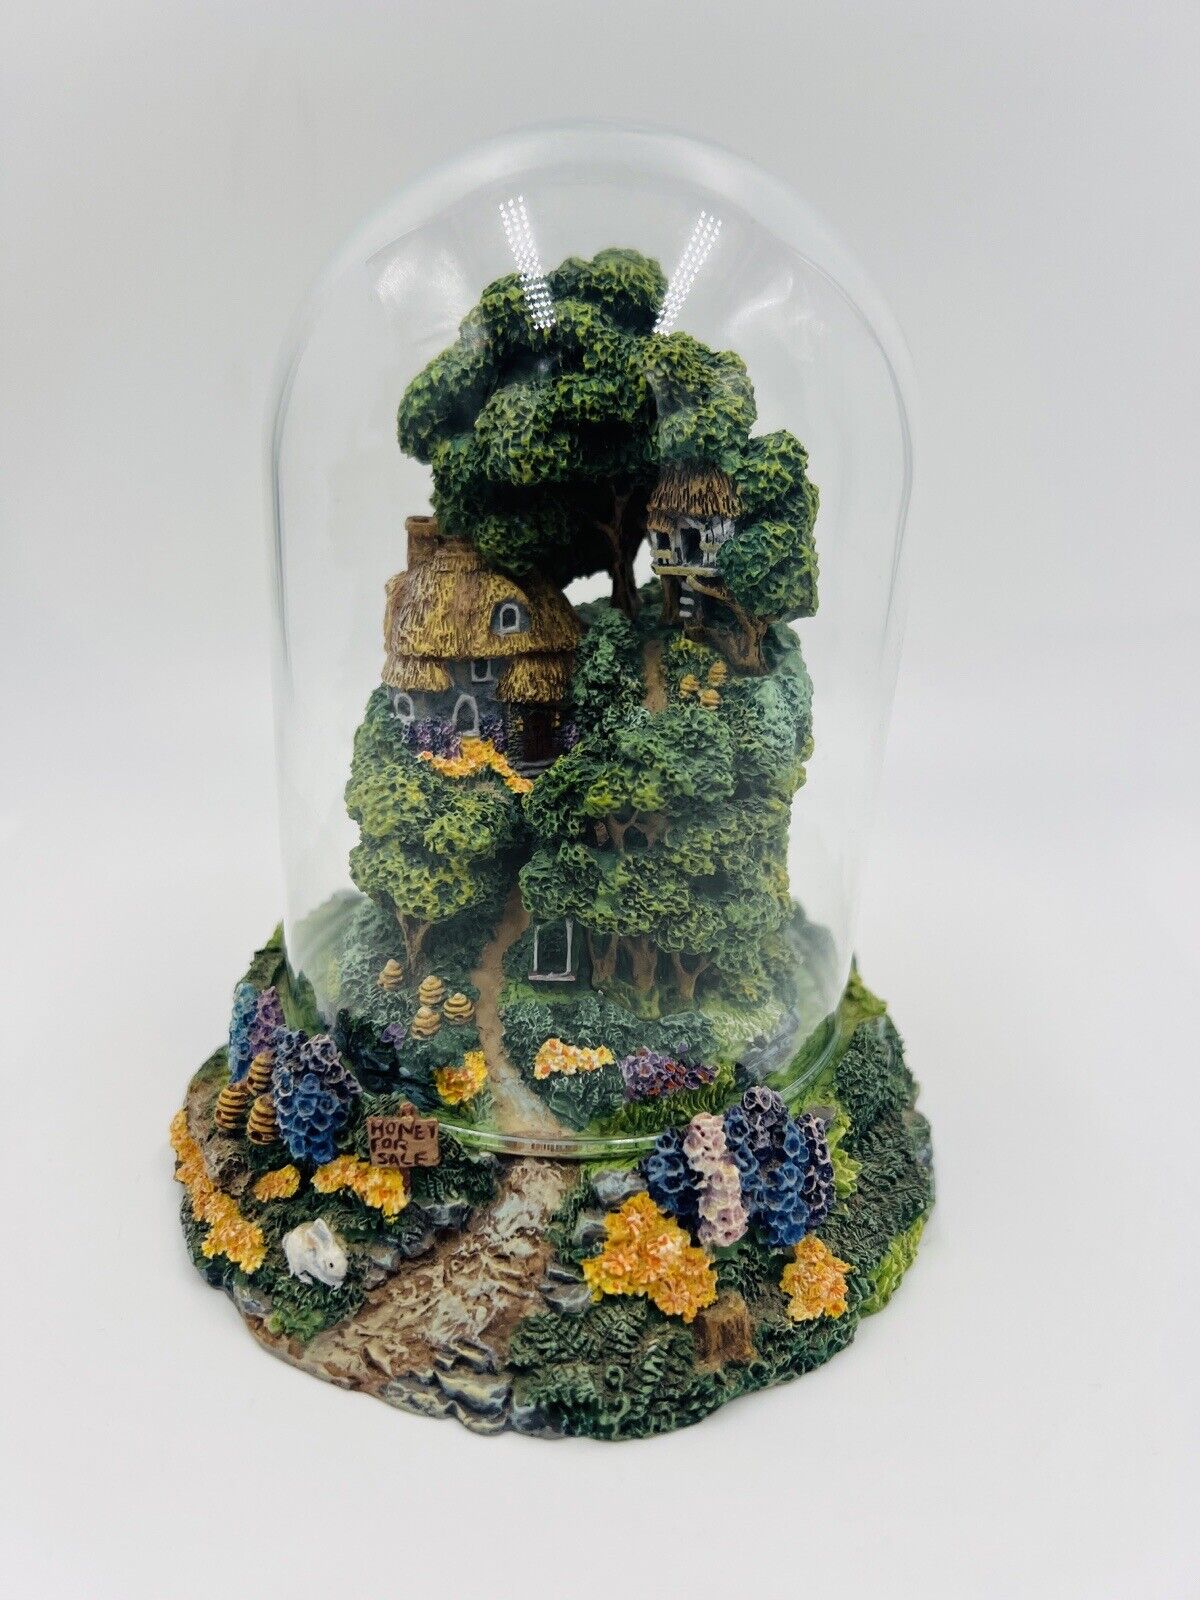 Franklin Mint Glass Dome Honey Hill Cottage Figurine Hand-Painted Home Decor